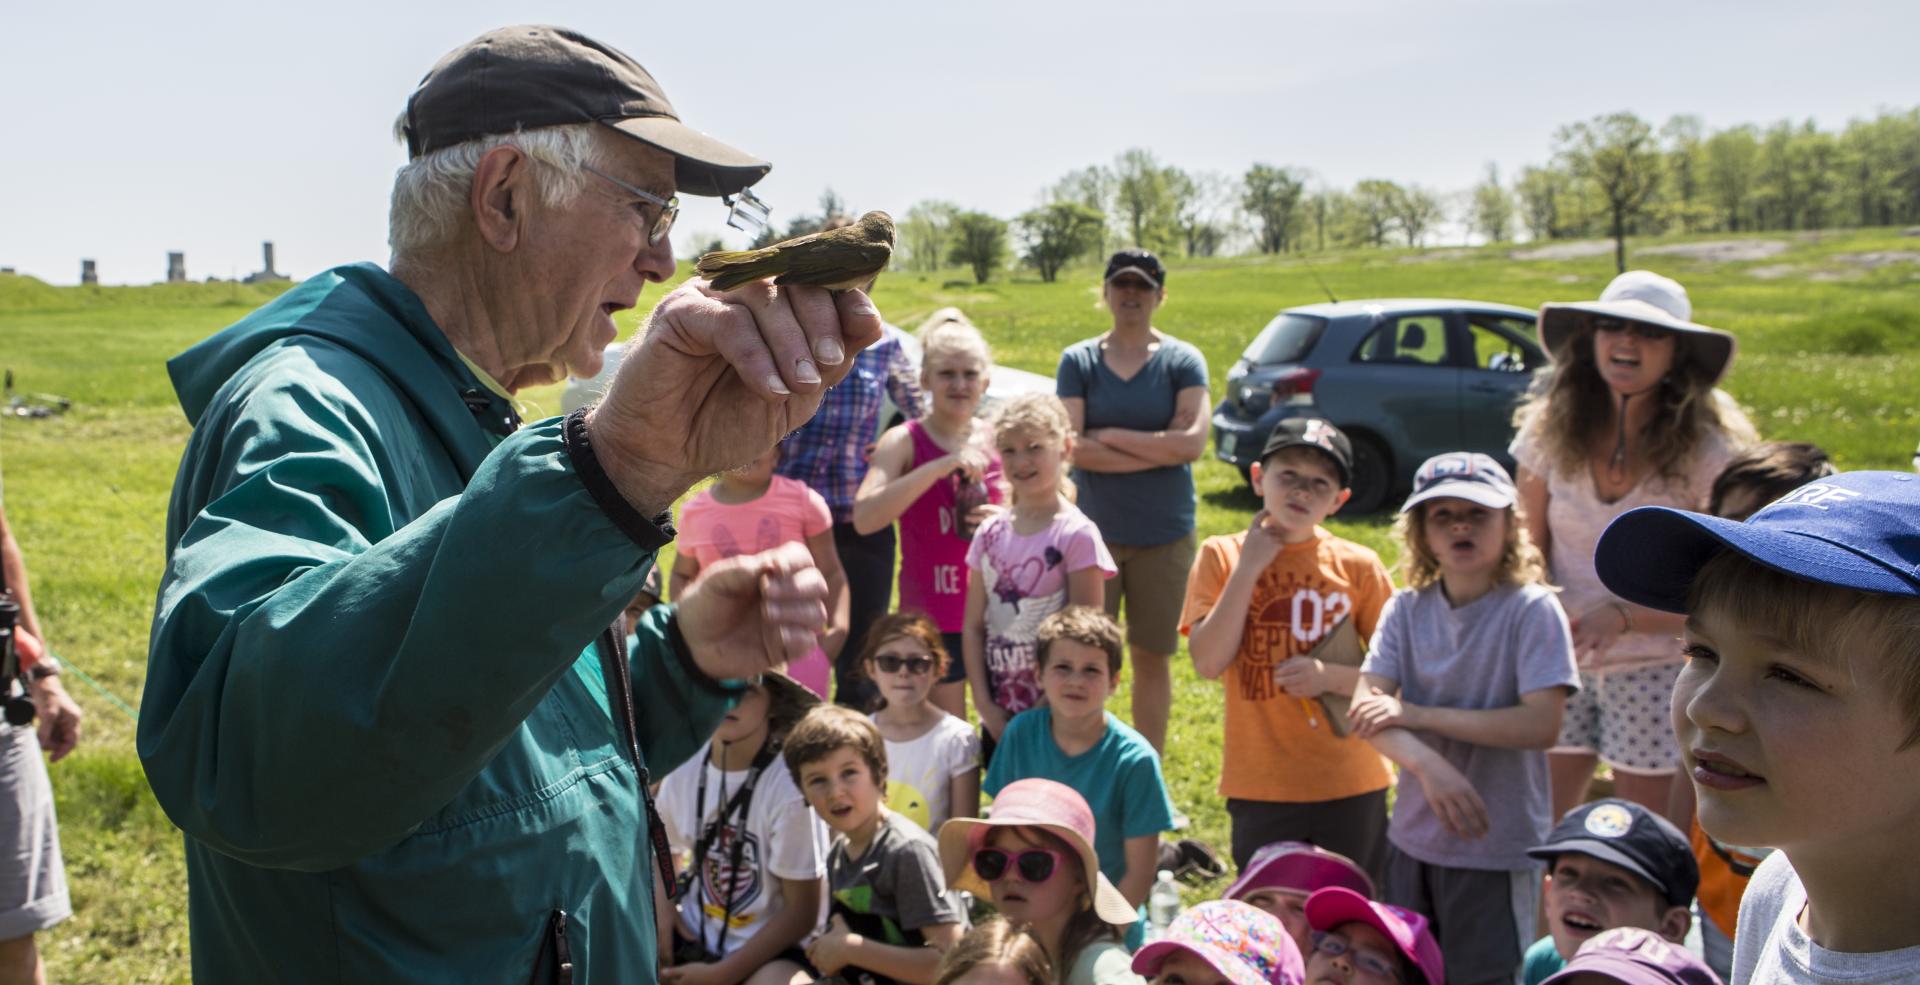 Knowledgeable birding guides talk about birds.